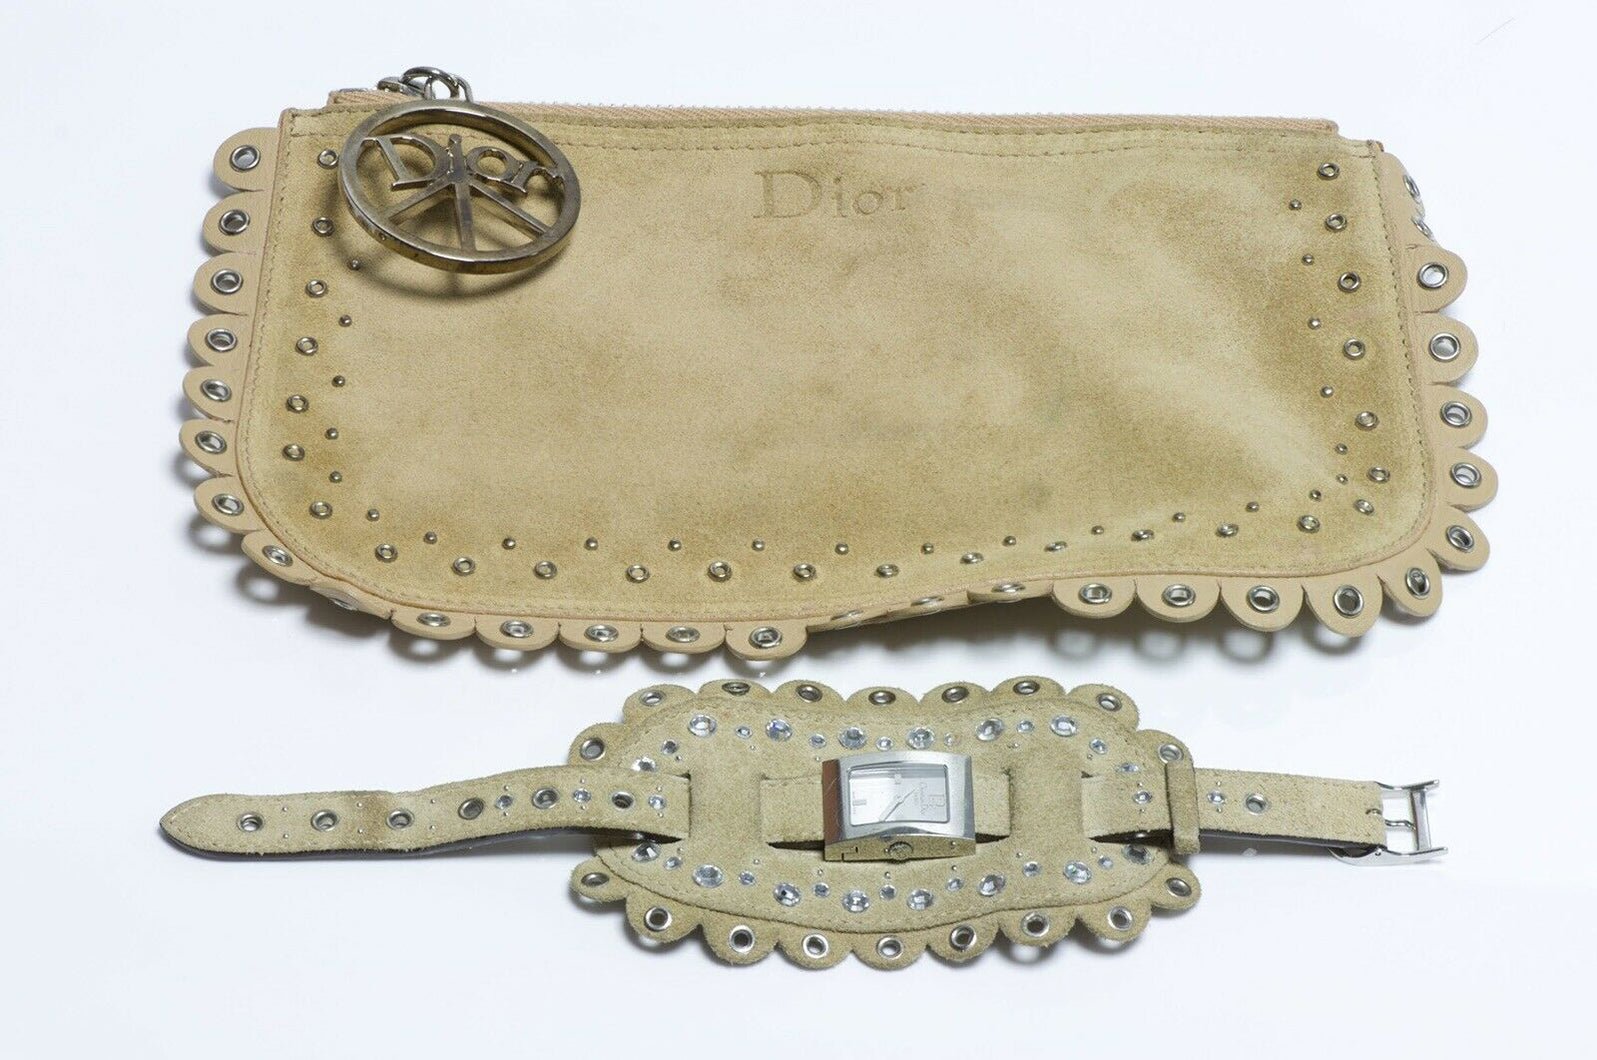 Christian DIOR John Galliano Brown Suede D78-109 Watch with Clutch Bag - DSF Antique Jewelry